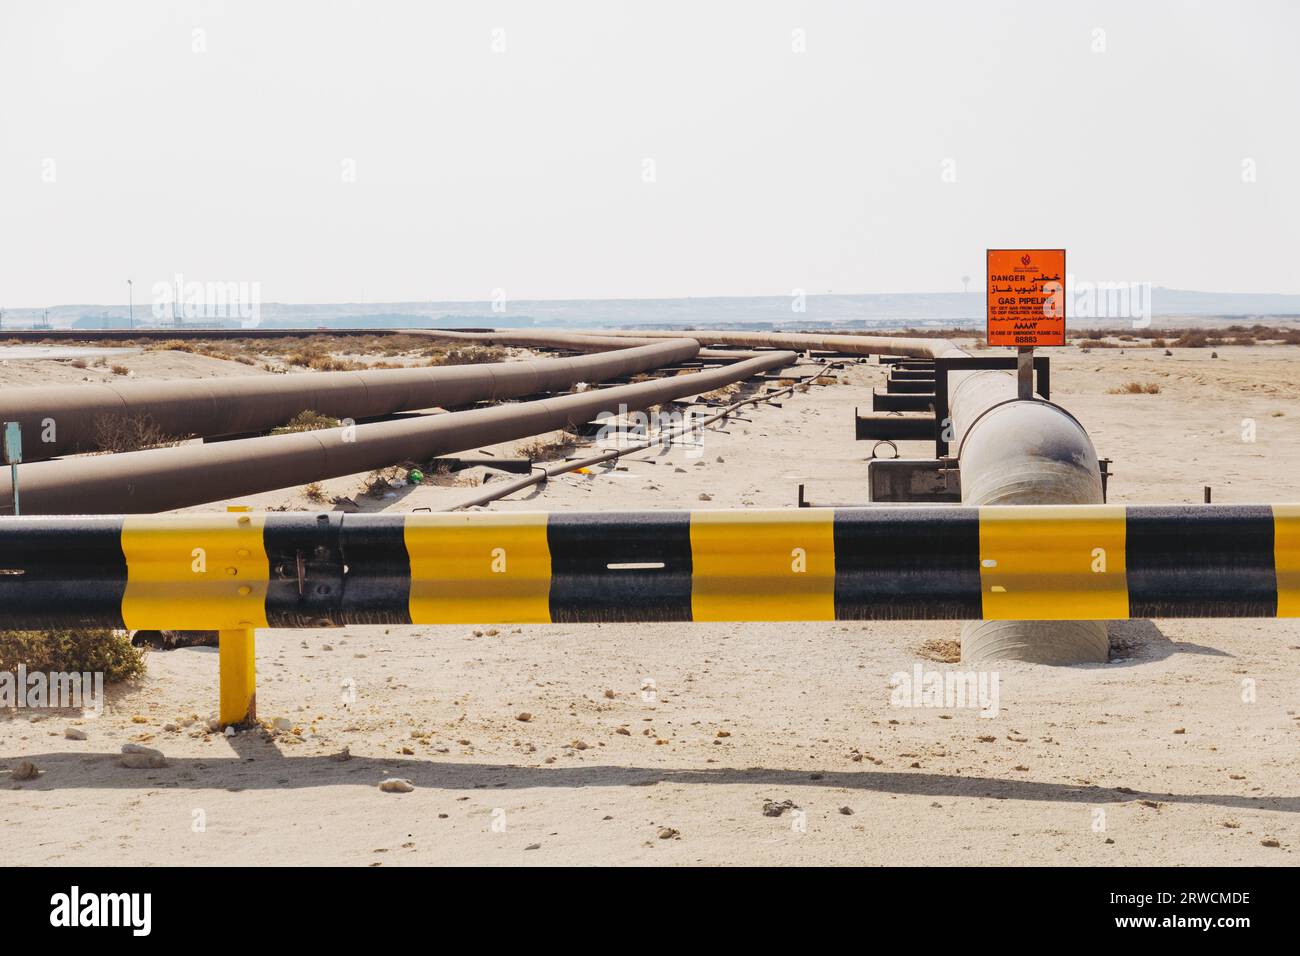 a natural gas pipeline with a warning sign in the Bahraini desert Stock Photo